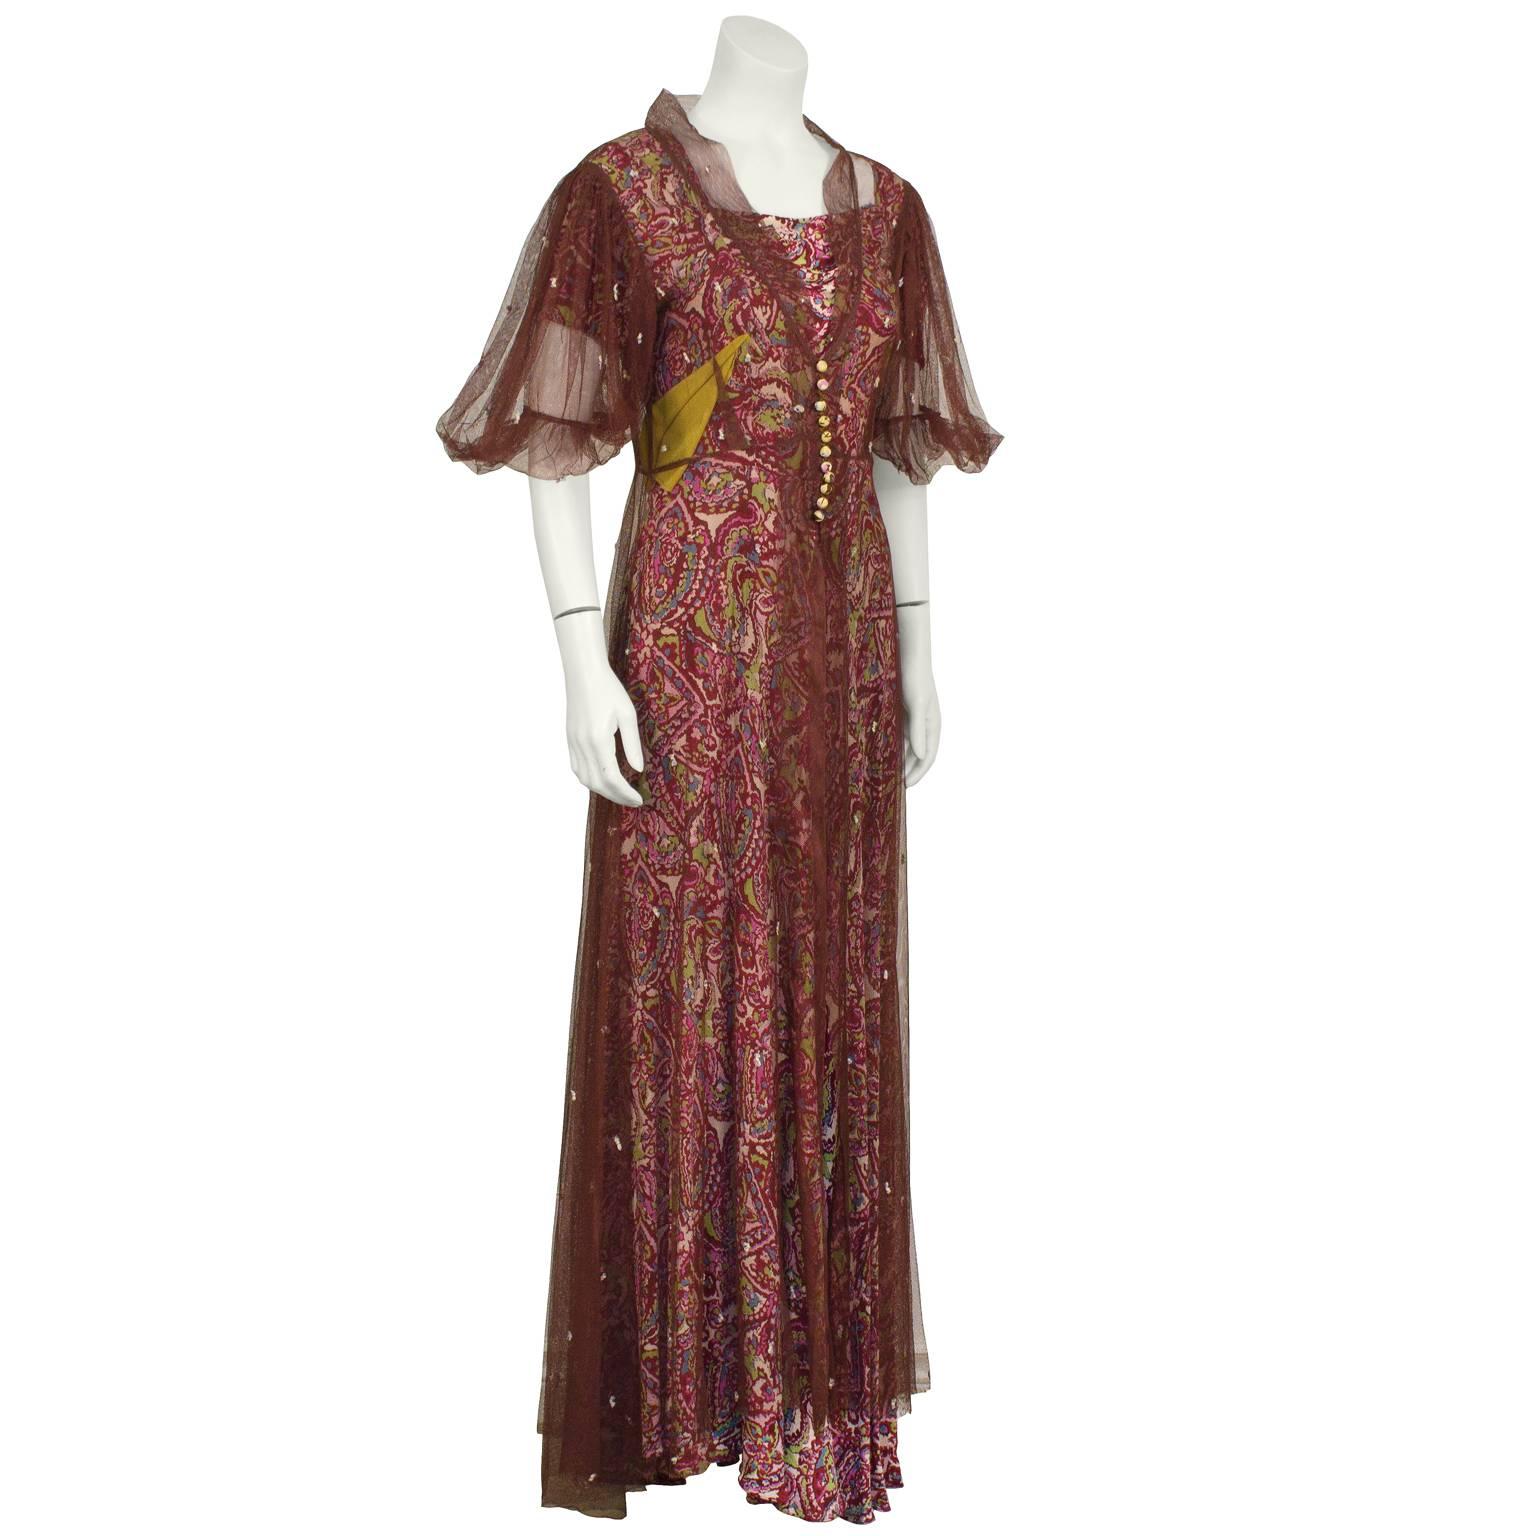 1940's anonymous crepe green and maroon paisley printed gown with attached line green sash that crosses in the front and ties at the back. The matching maroon net overcoat has a puffed short sleeve and fastens at the natural waist with 11 covered